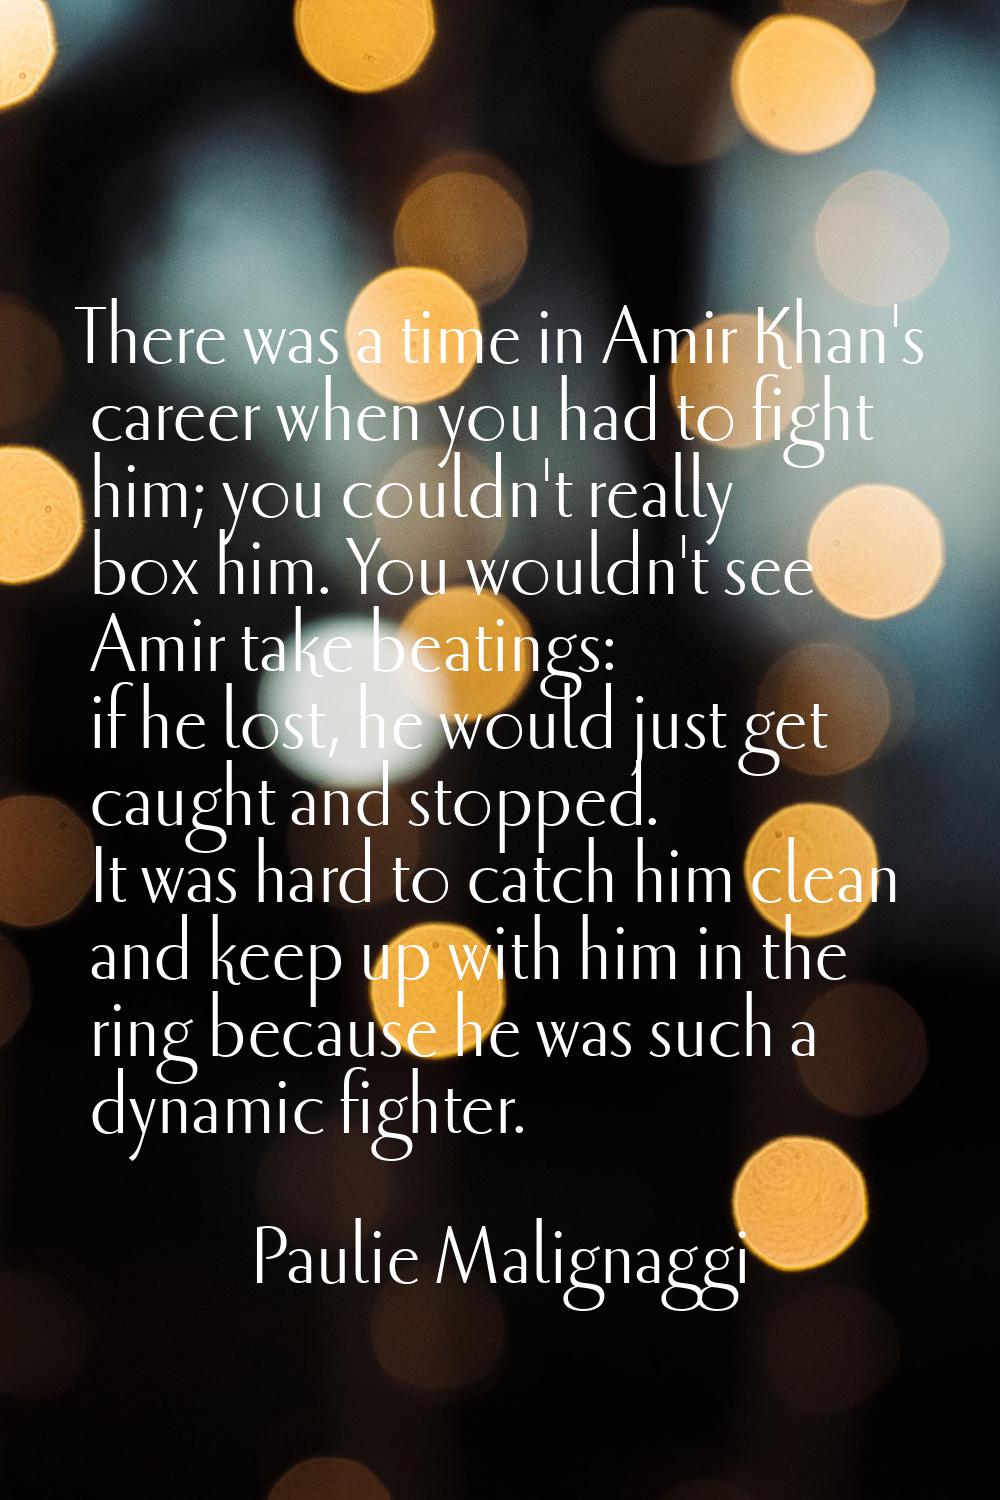 There was a time in Amir Khan's career when you had to fight him; you couldn't really box him. You 